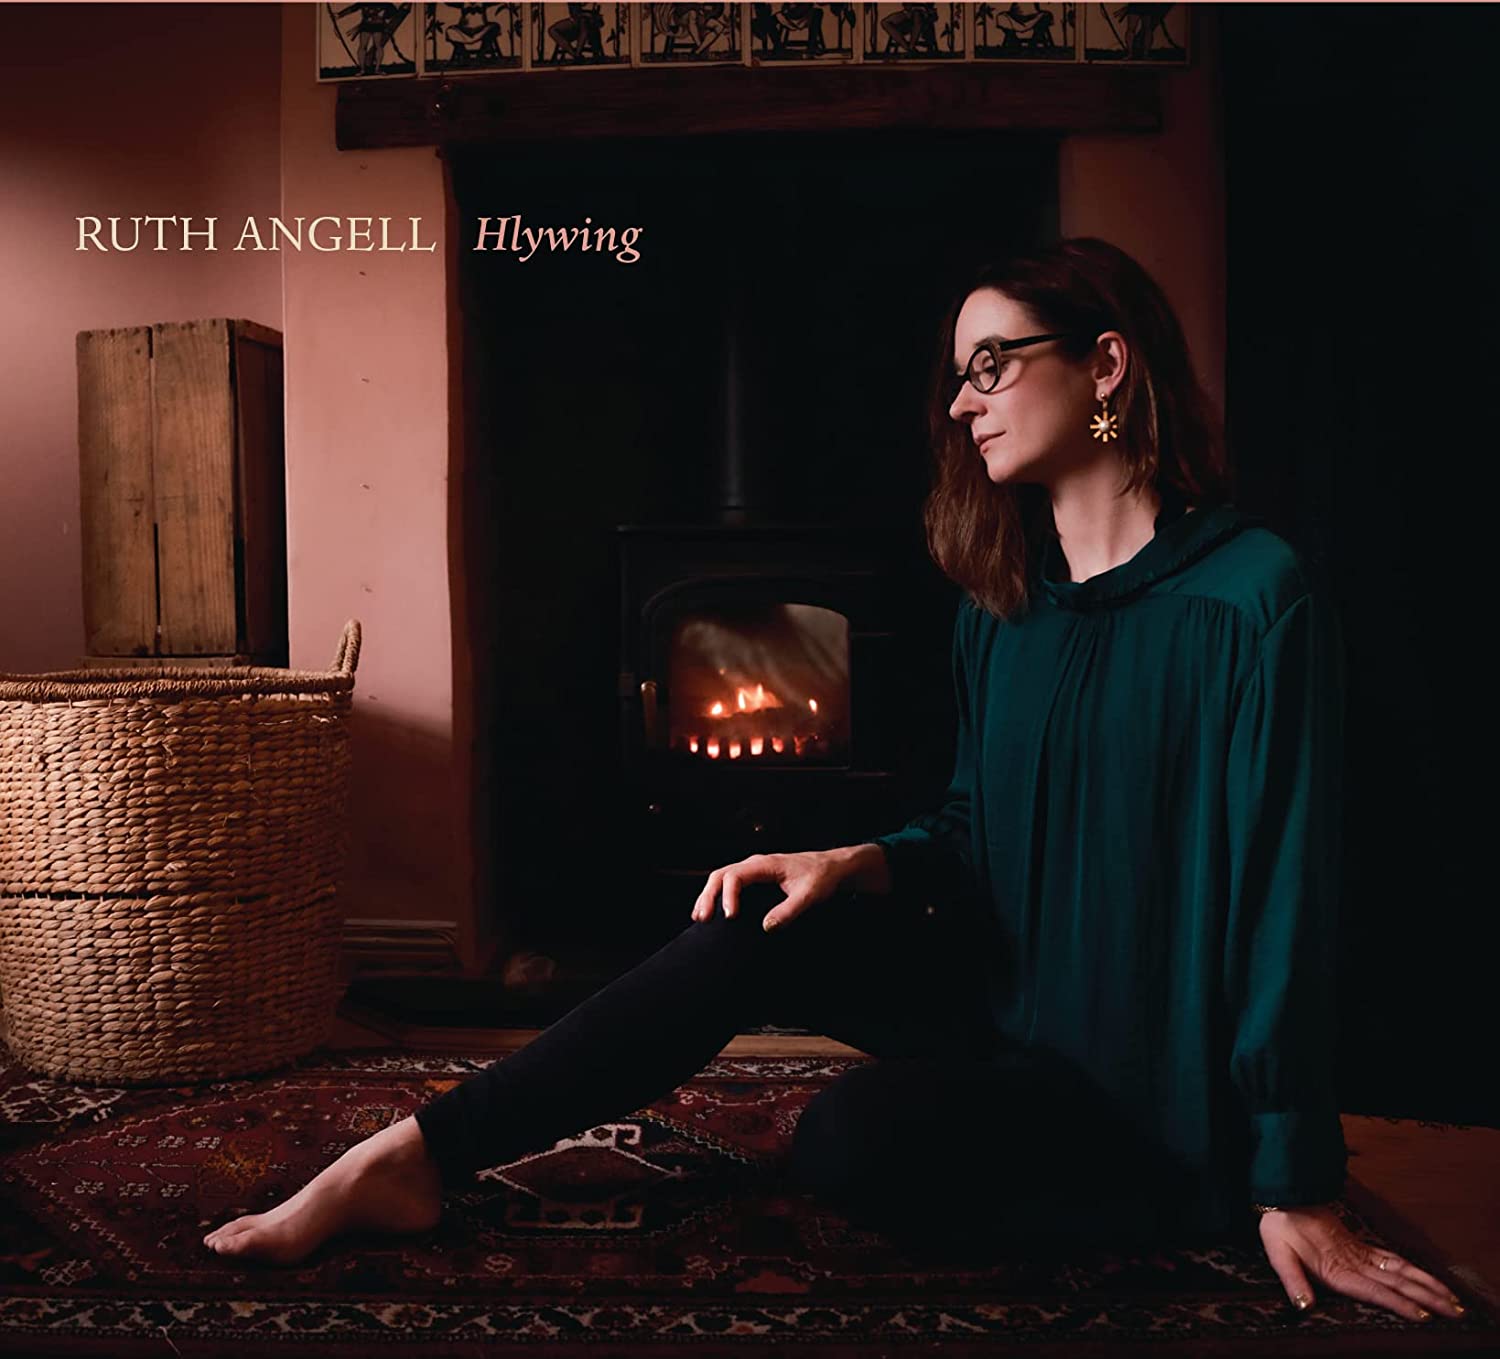 Ruth_Angell_Hlywing CD cover